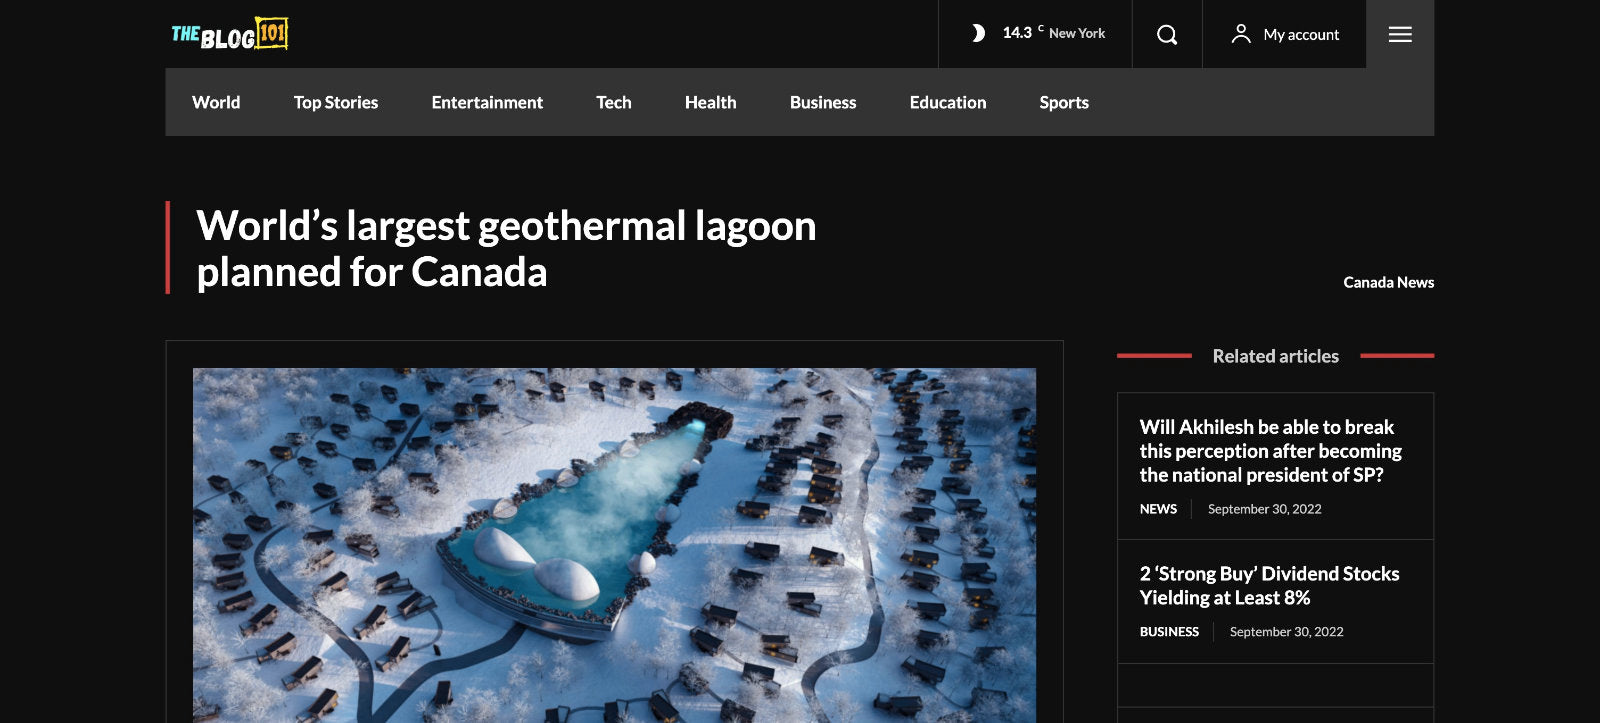 [EN] World’s largest geothermal lagoon planned for Canada